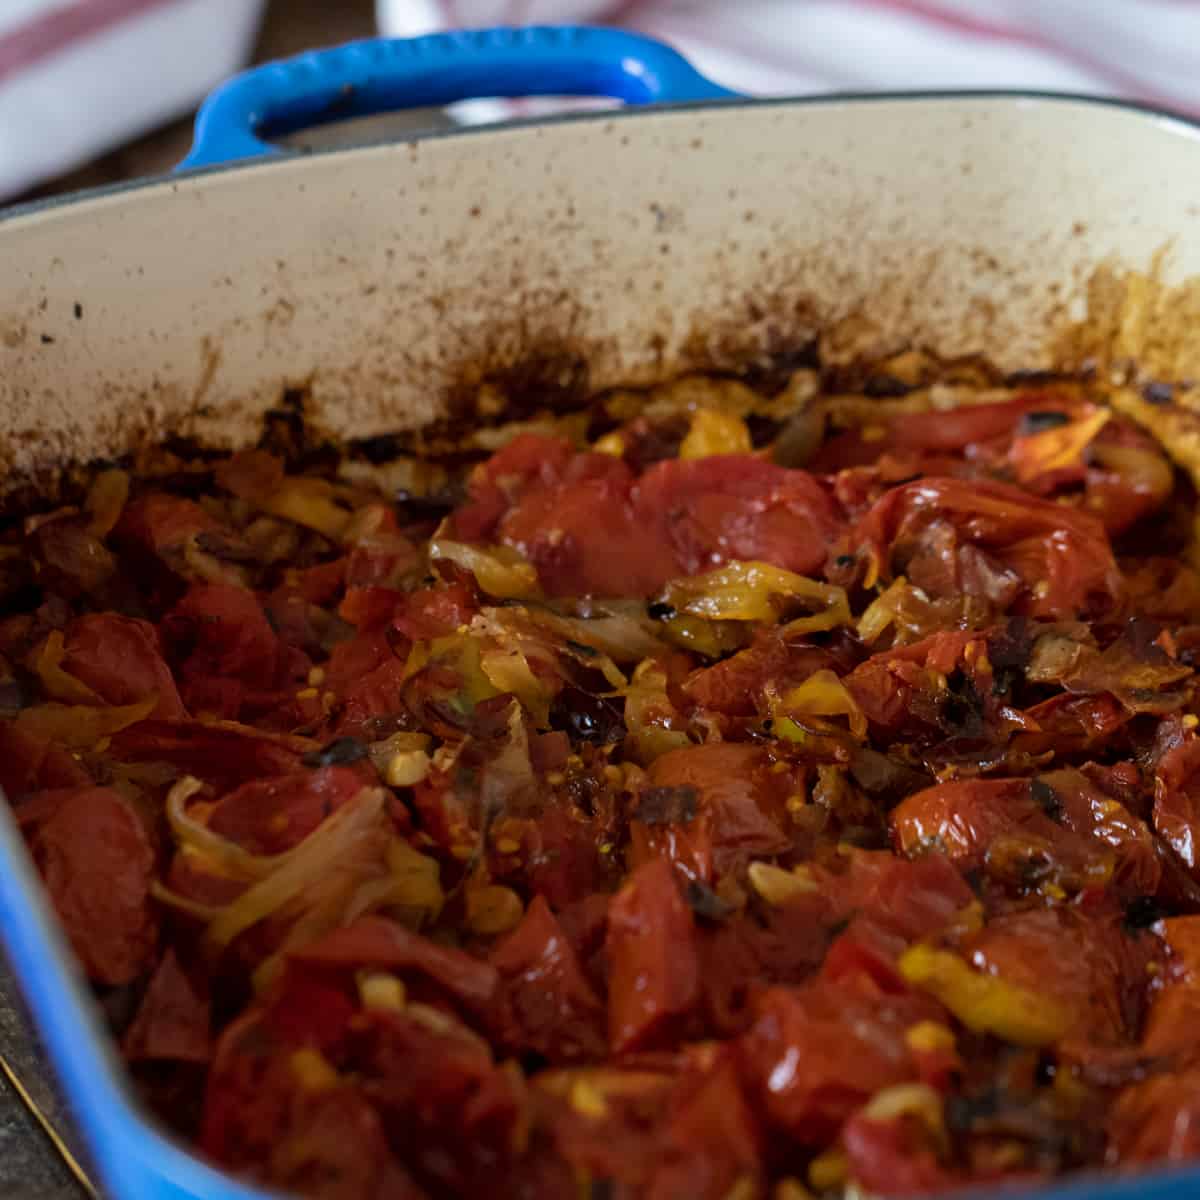 Oven roasted tomatoes in a baking dish.